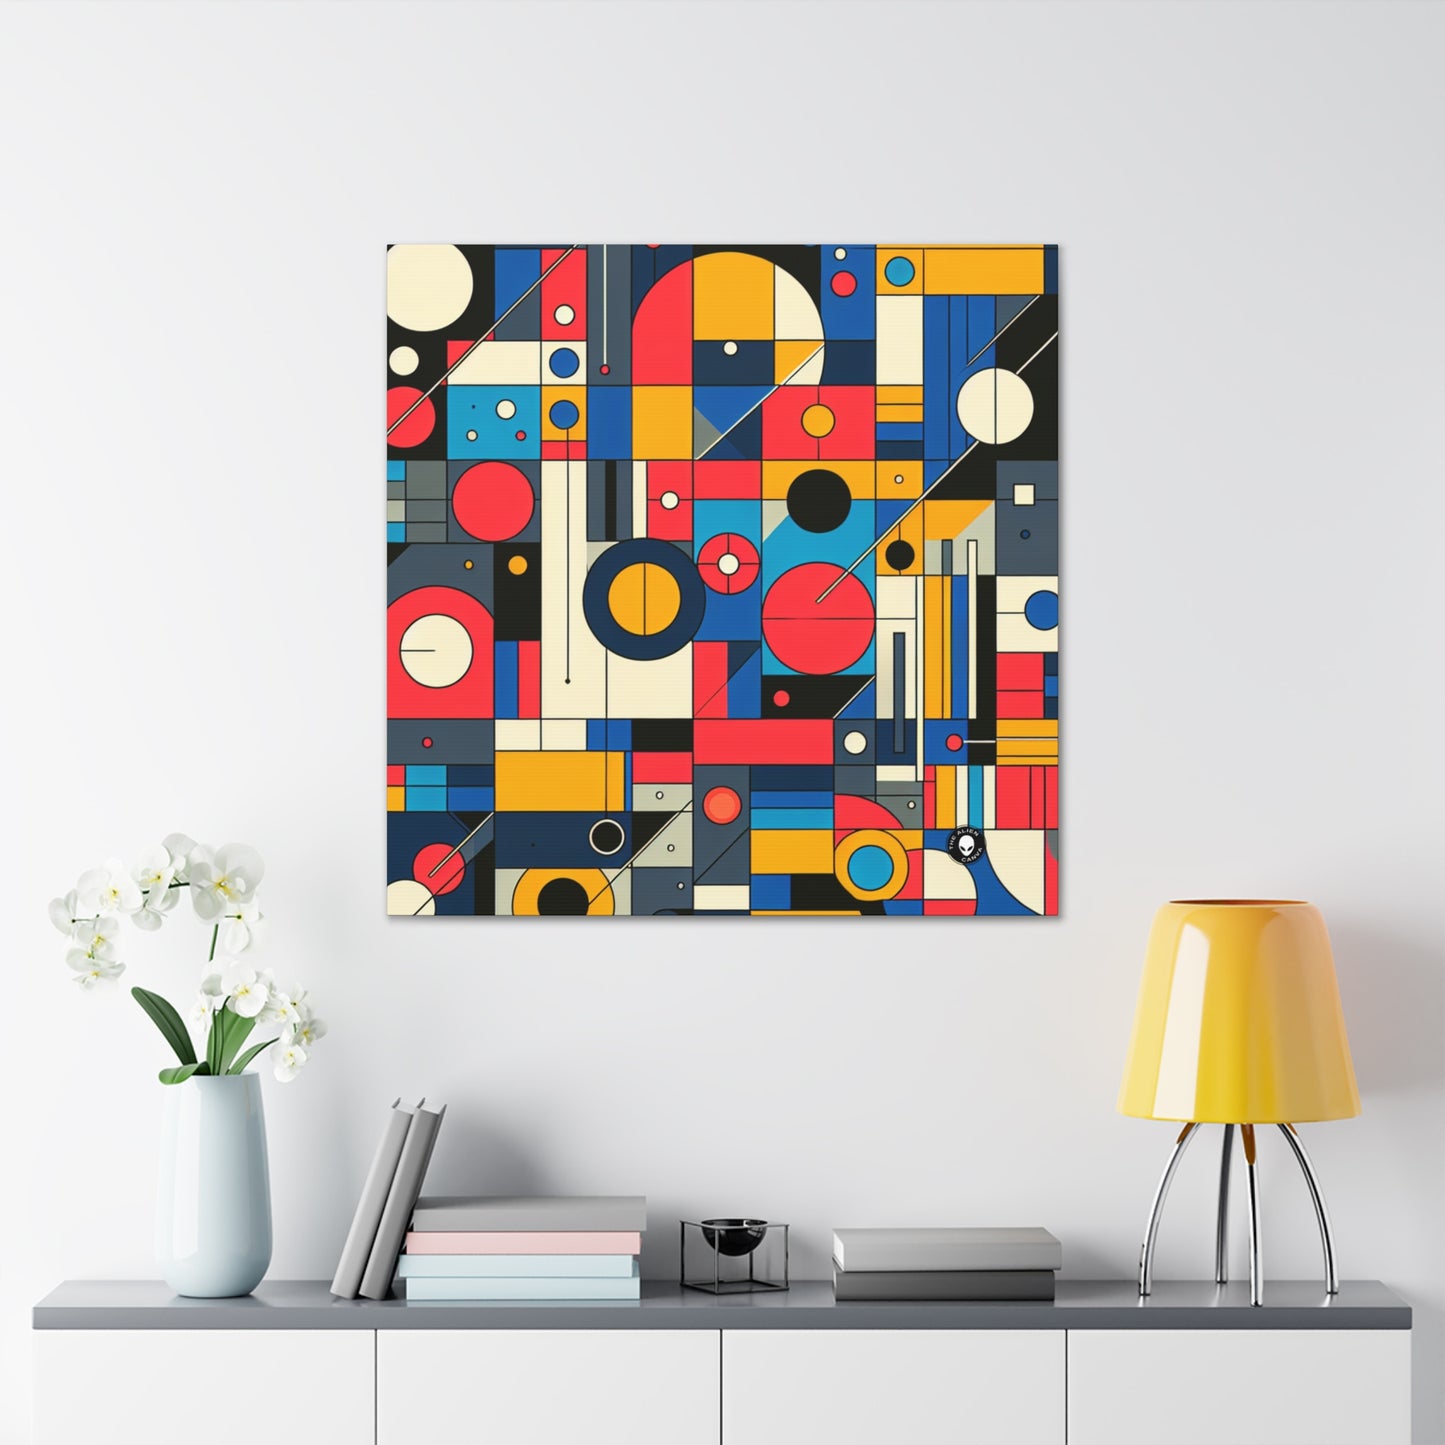 "Harmony in Nature: Geometric Abstraction" - The Alien Canva Geometric Abstraction